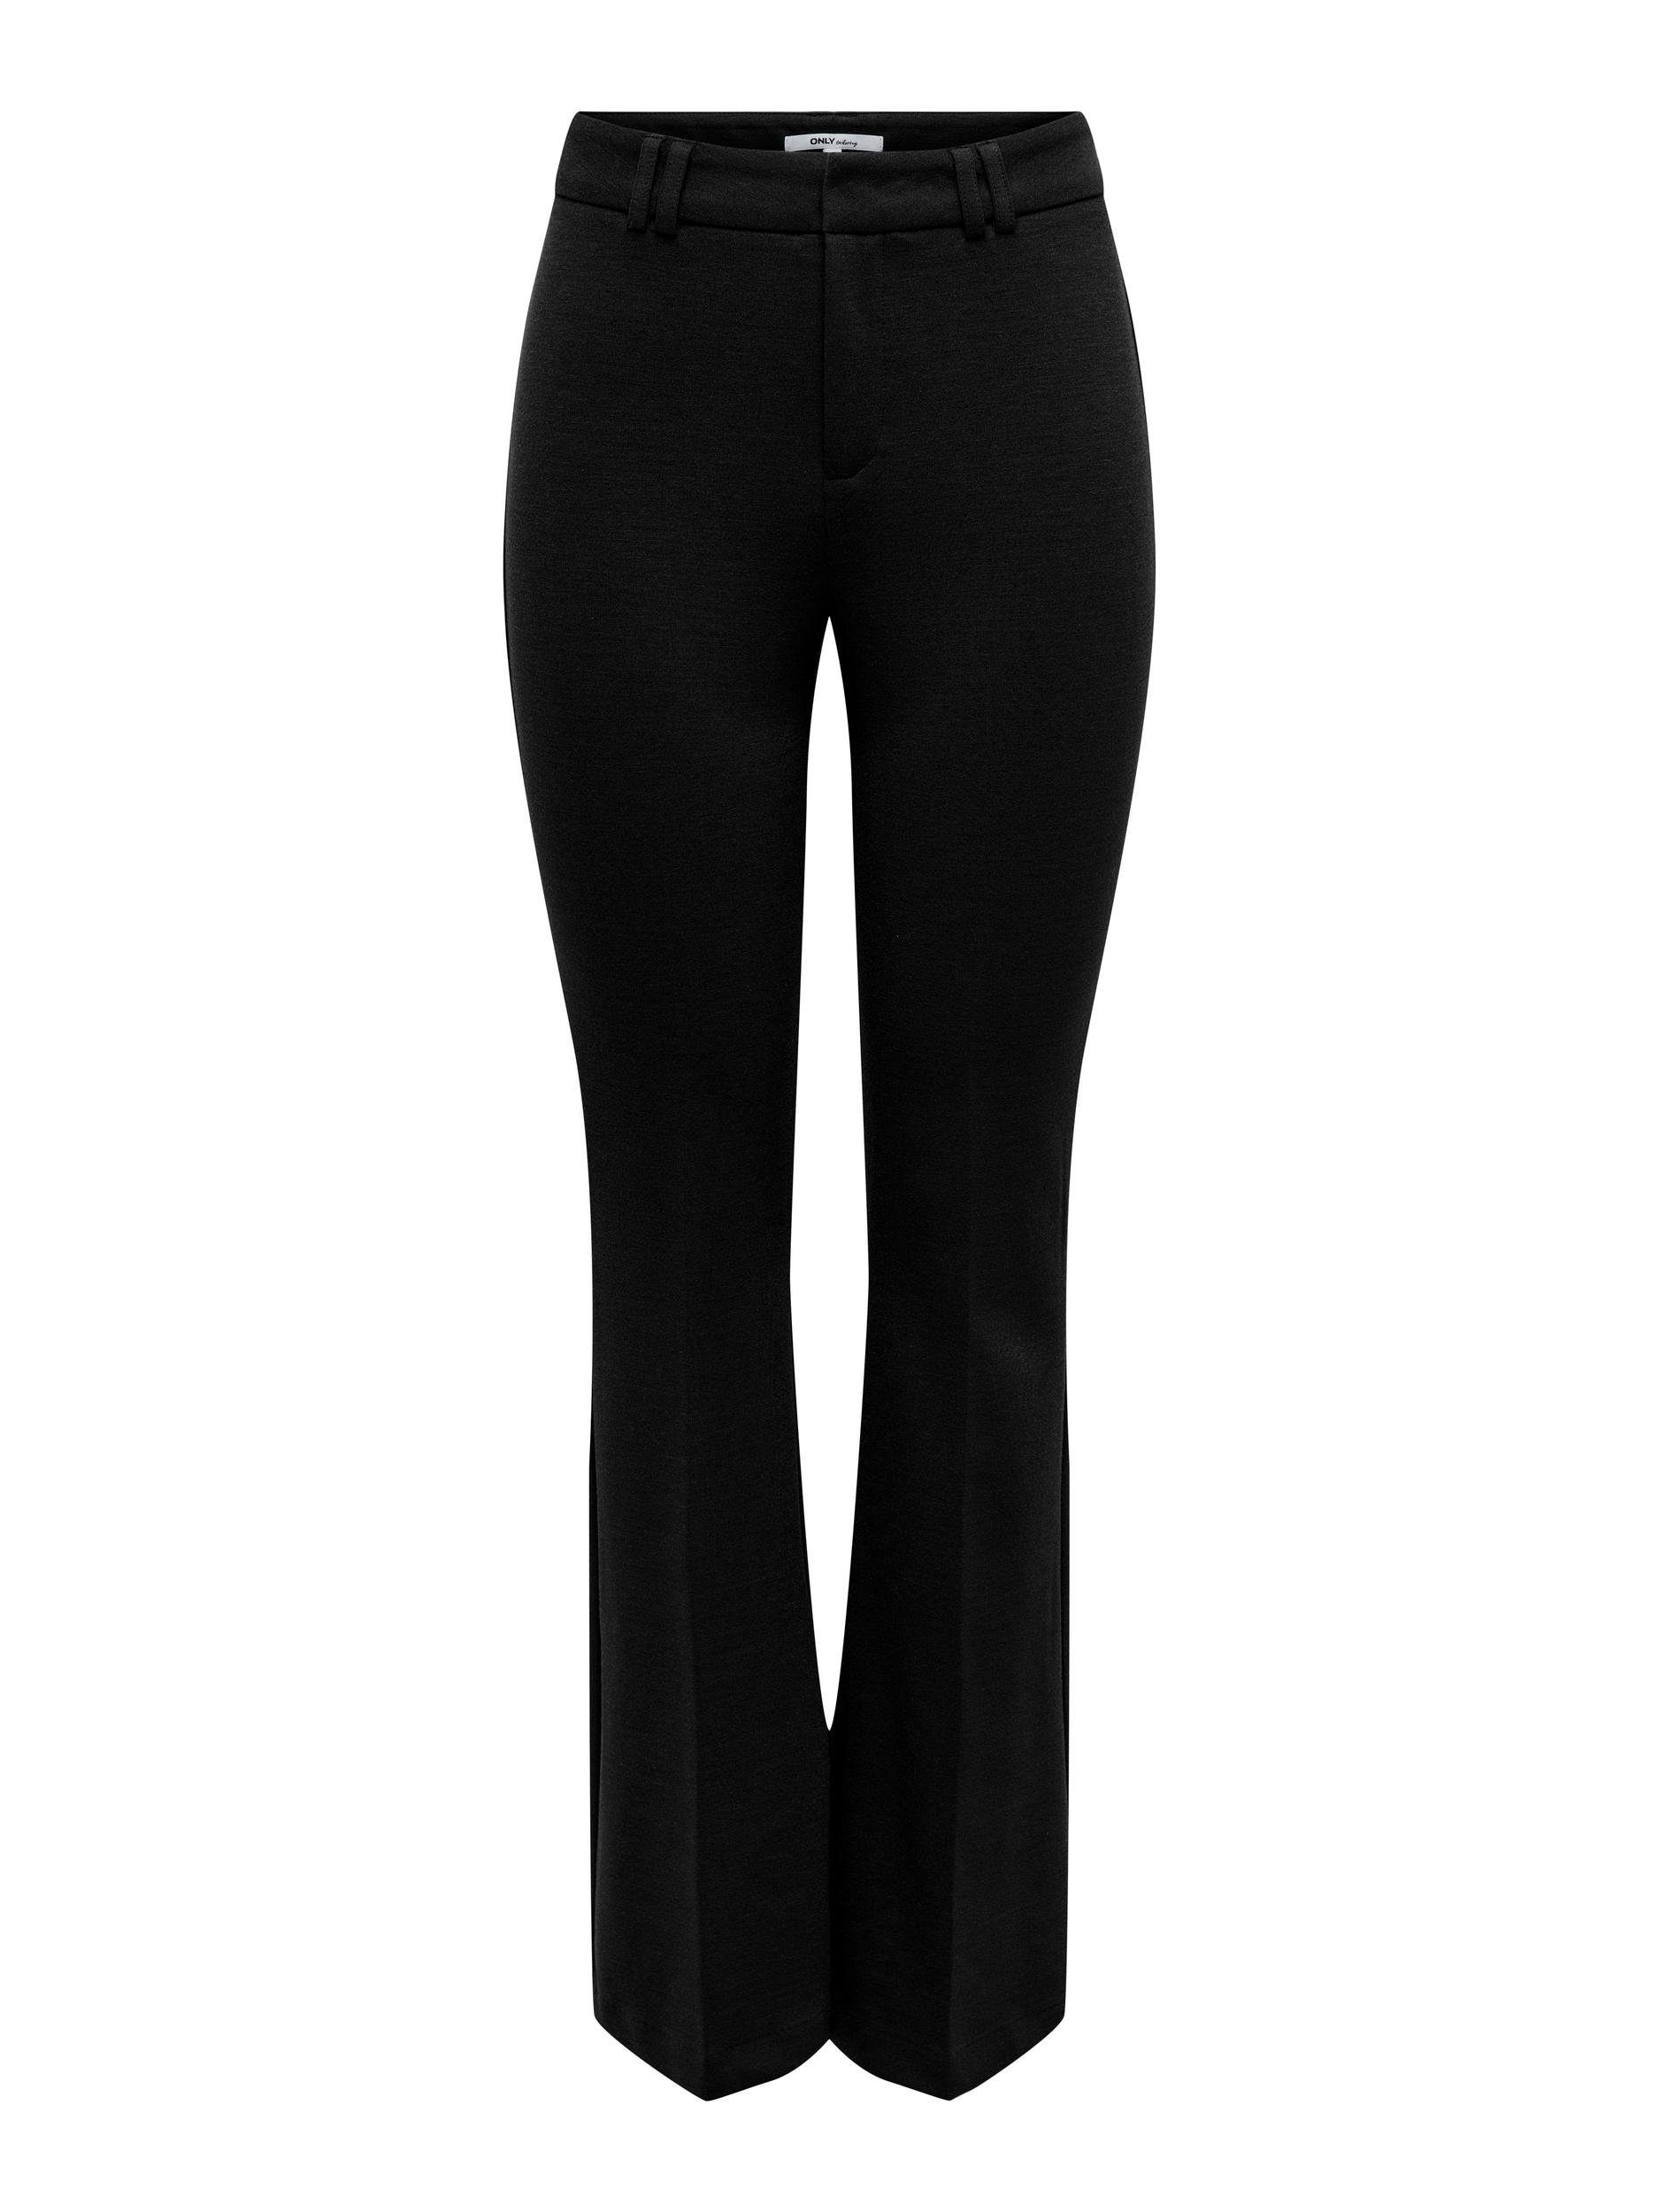 ONLPEACH Anzughose PANT Black FLARED NOOS ONLY TLR MW